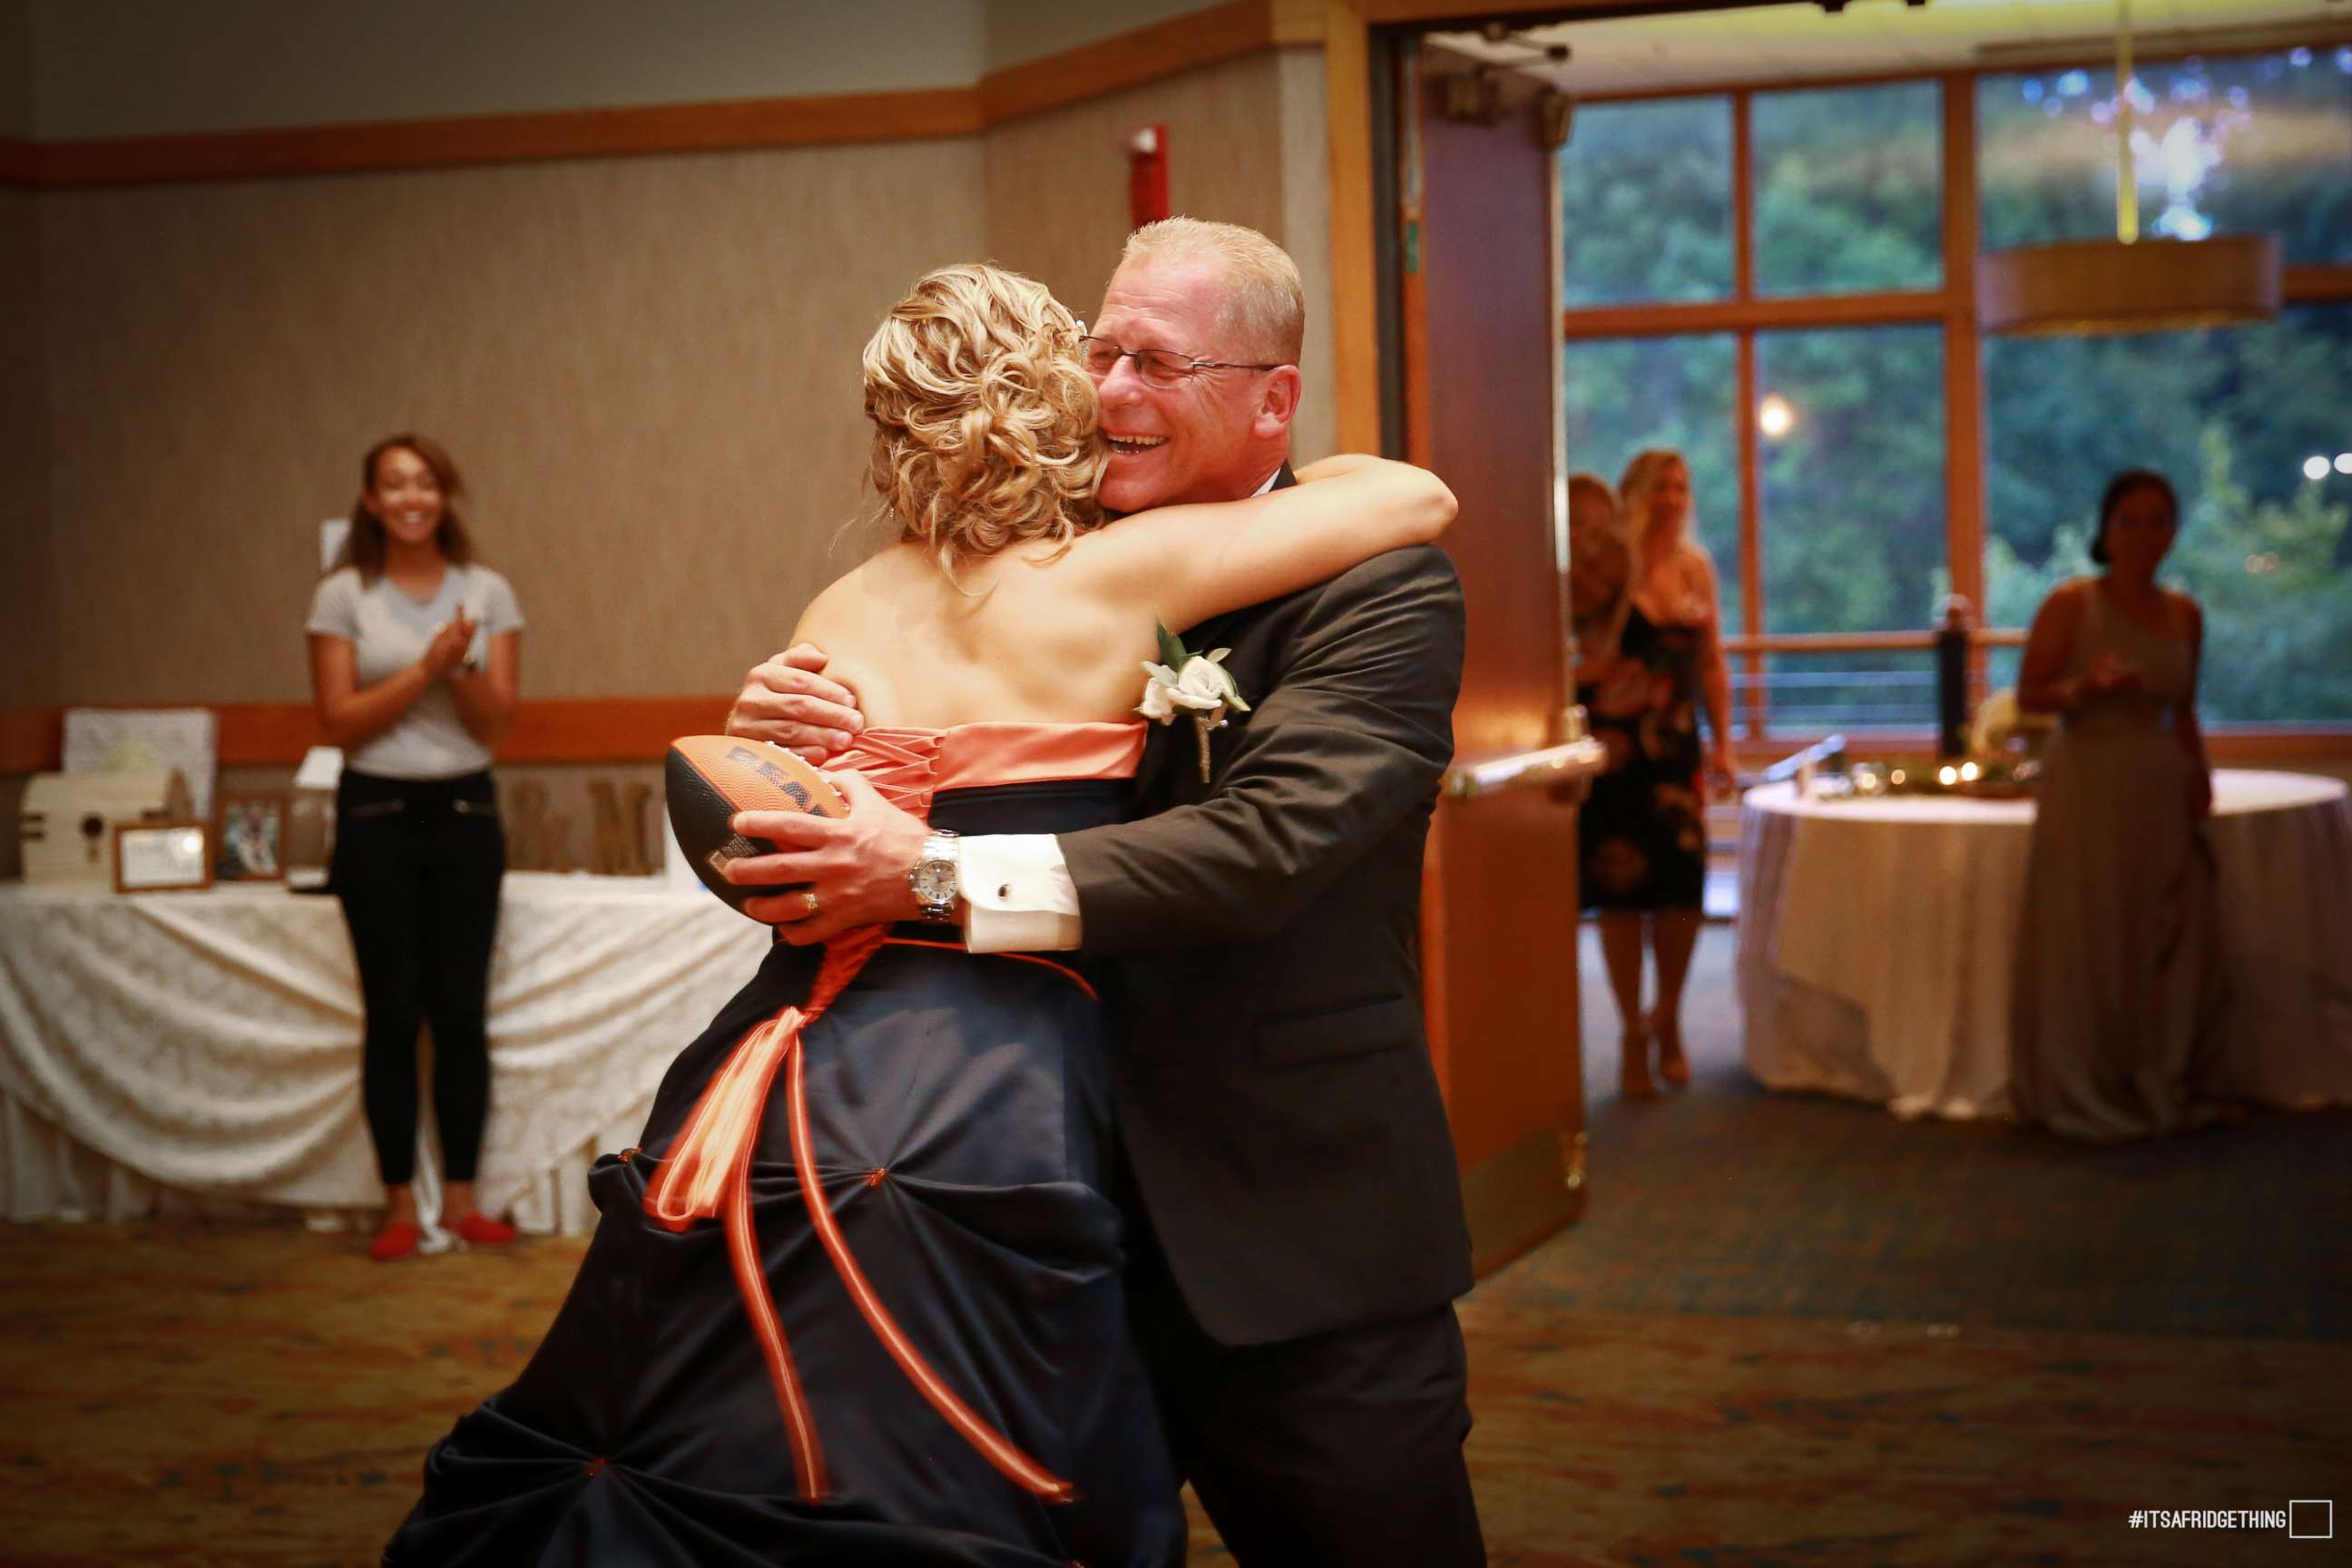 PHOTO: Brittney Harmon surprised her die-hard Chicago Bears fan father, Steve Benda, by wearing a team-themed dress at her wedding on July 22, 2017.